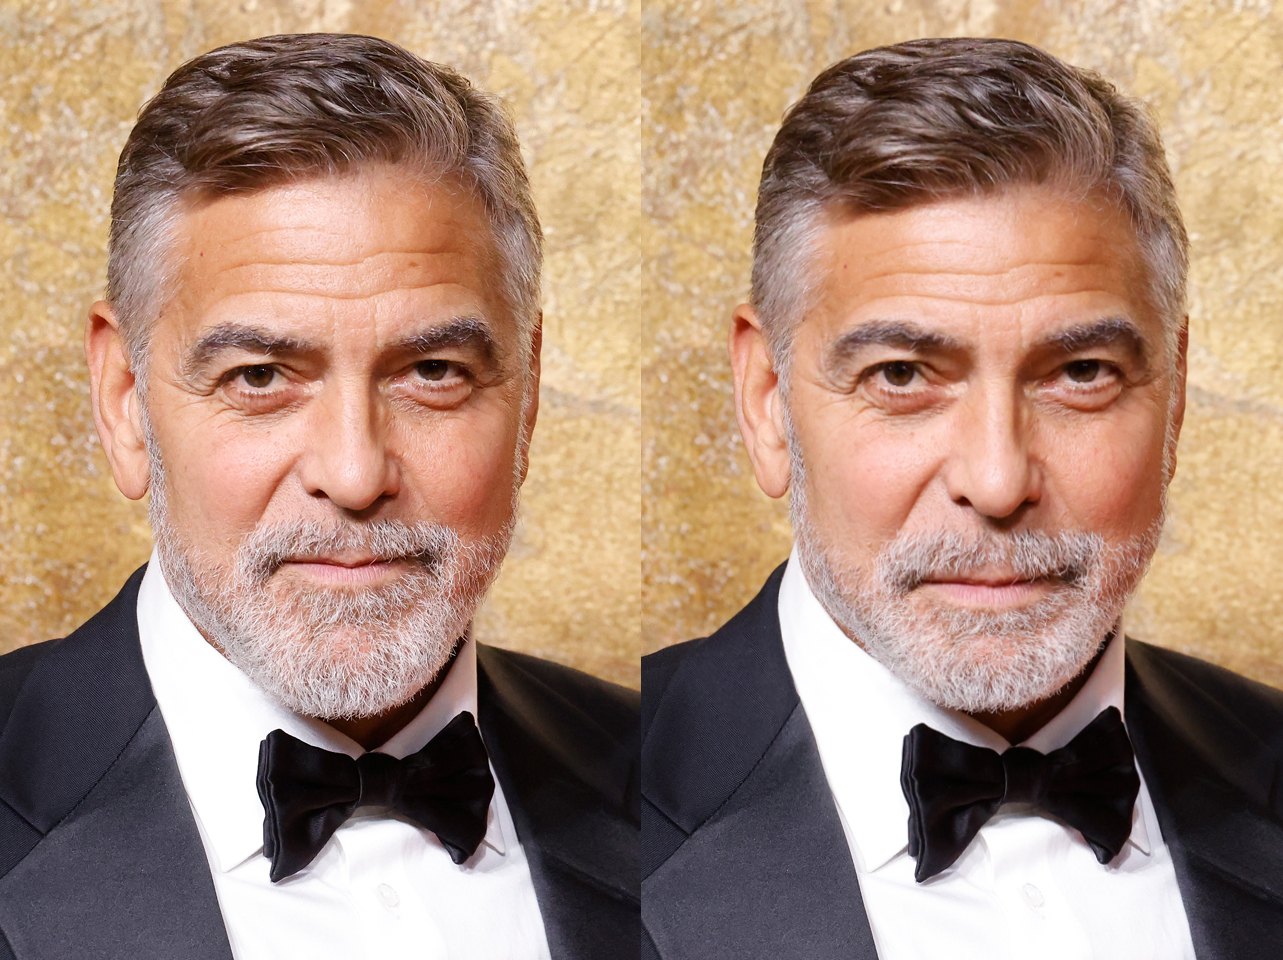 The real George Clooney vs Ideal self | Source: Getty Images